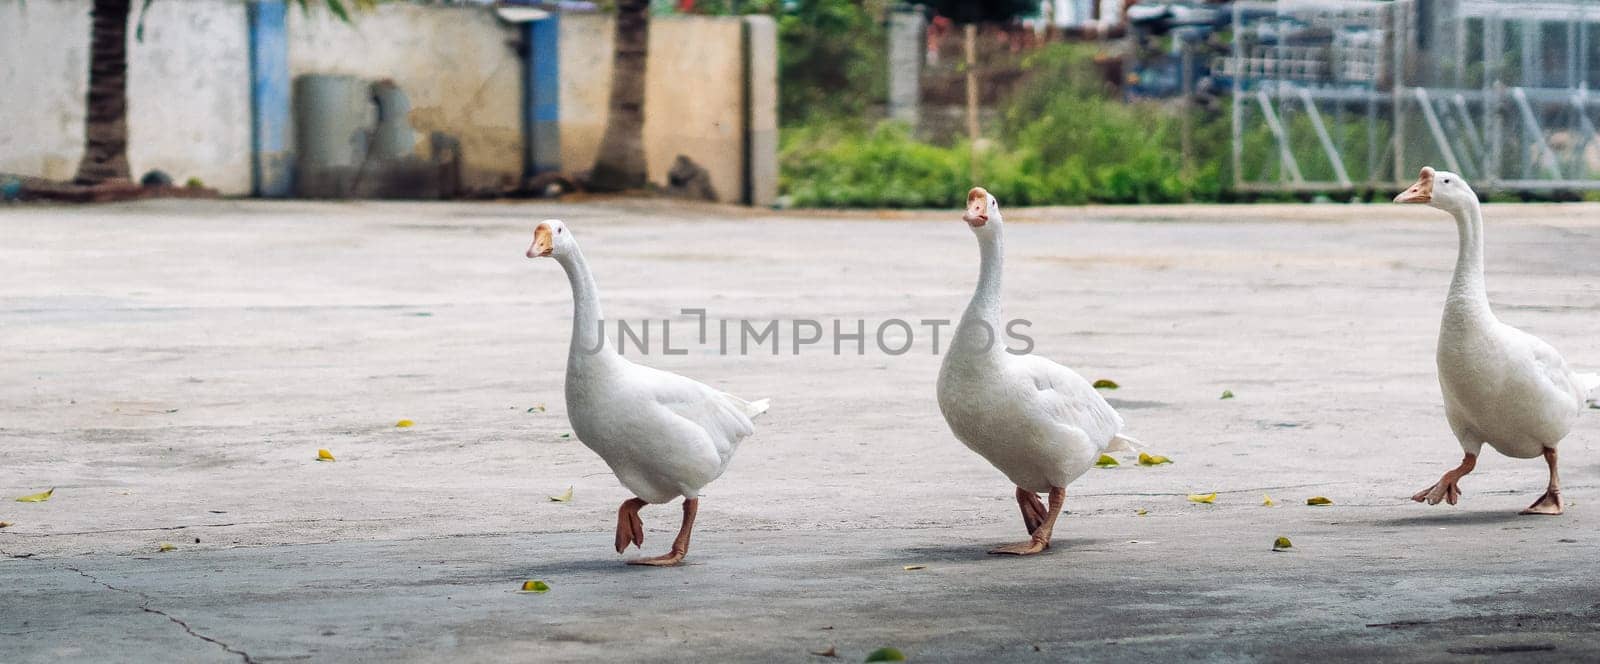 Several white geese walking together in small city. Craned necks. Summer mood, live close to domestic farm animals. Funny group of friends by nandrey85